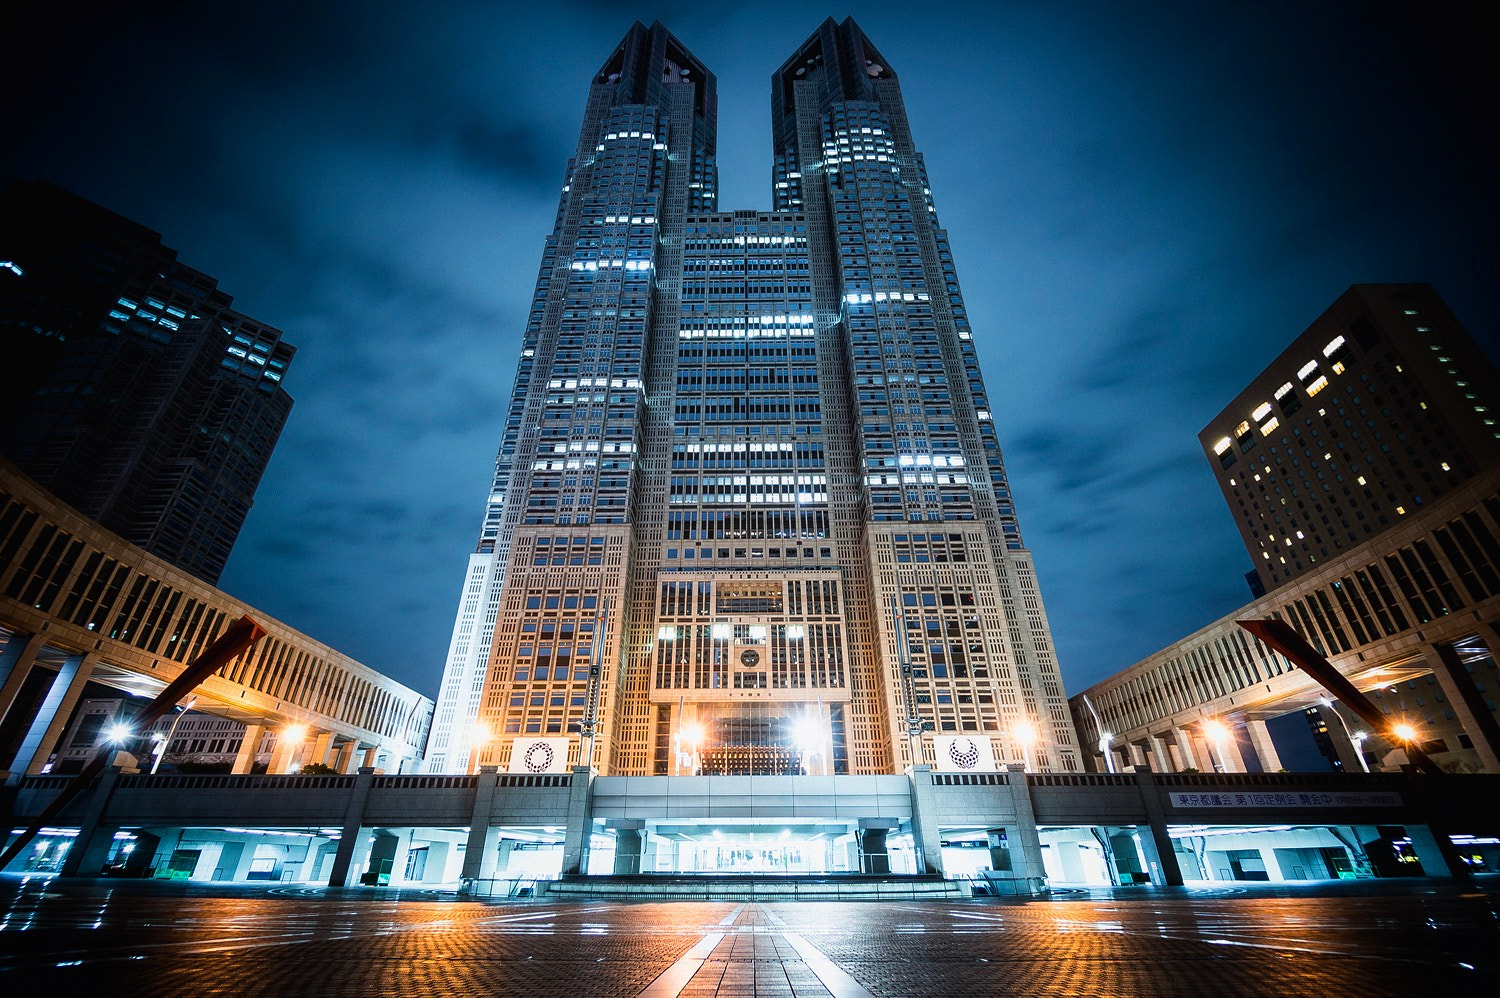 Sony a7 II sample photo. Tokyo metropolitan government office building photography